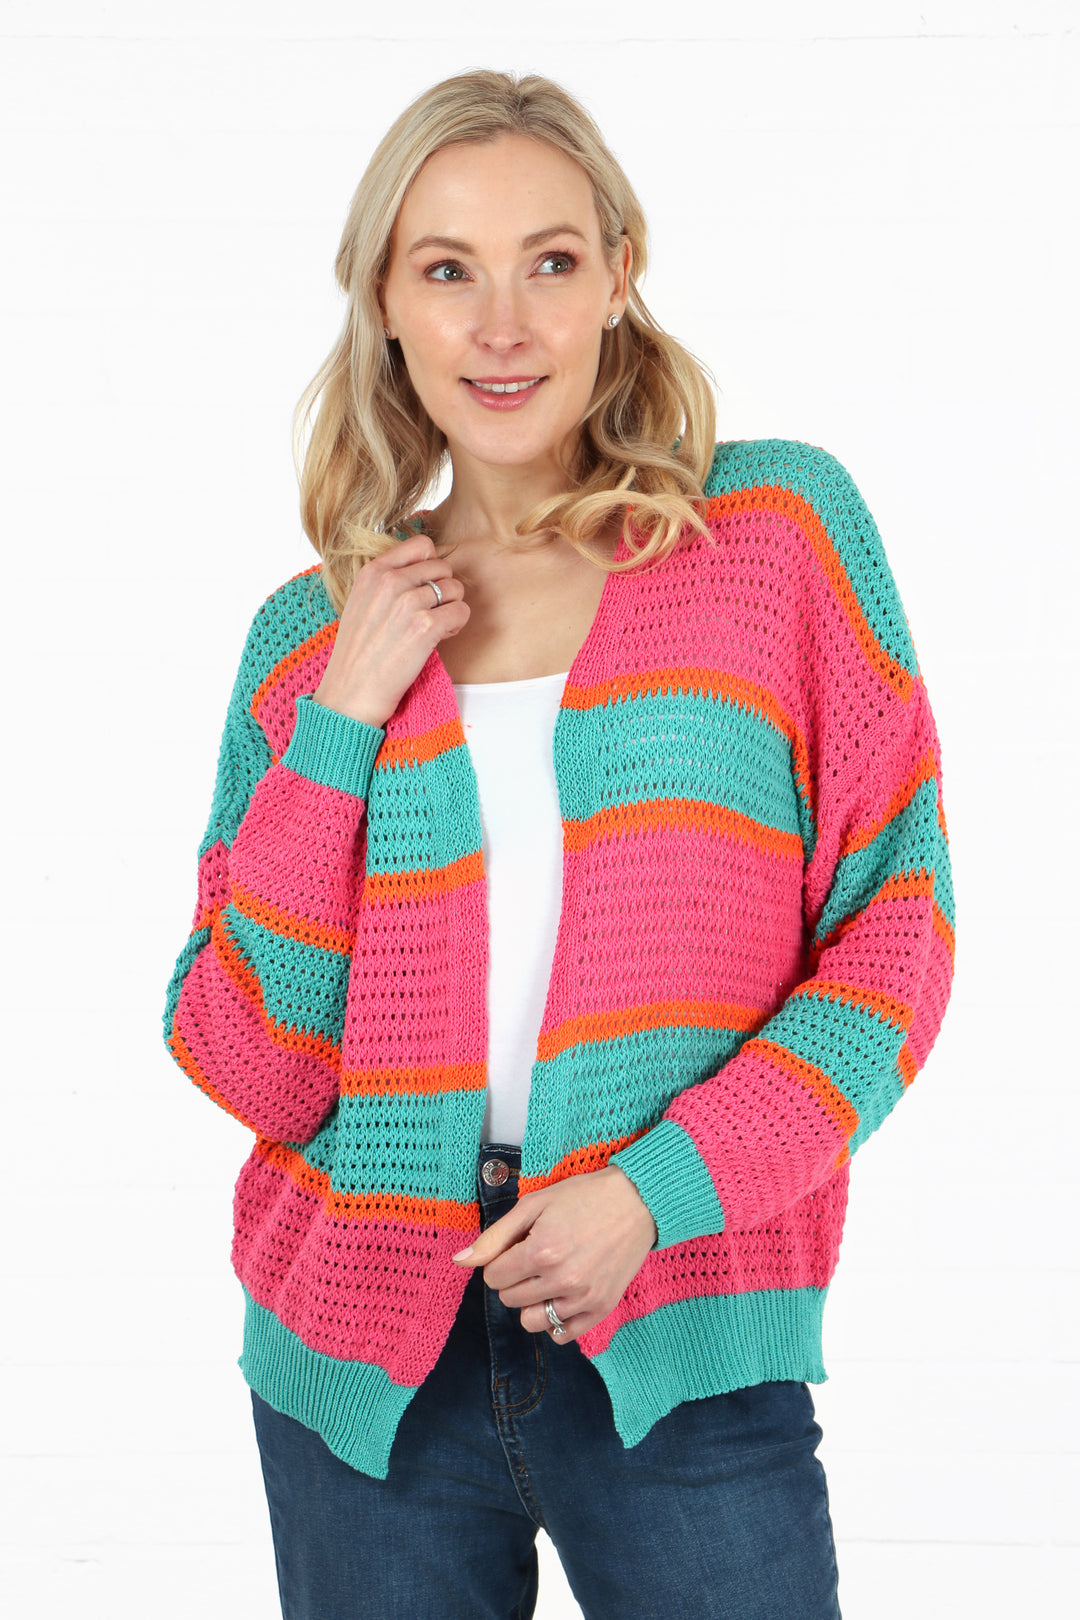 model wearing a cotton open front pink, turquoise and orange striped cardigan